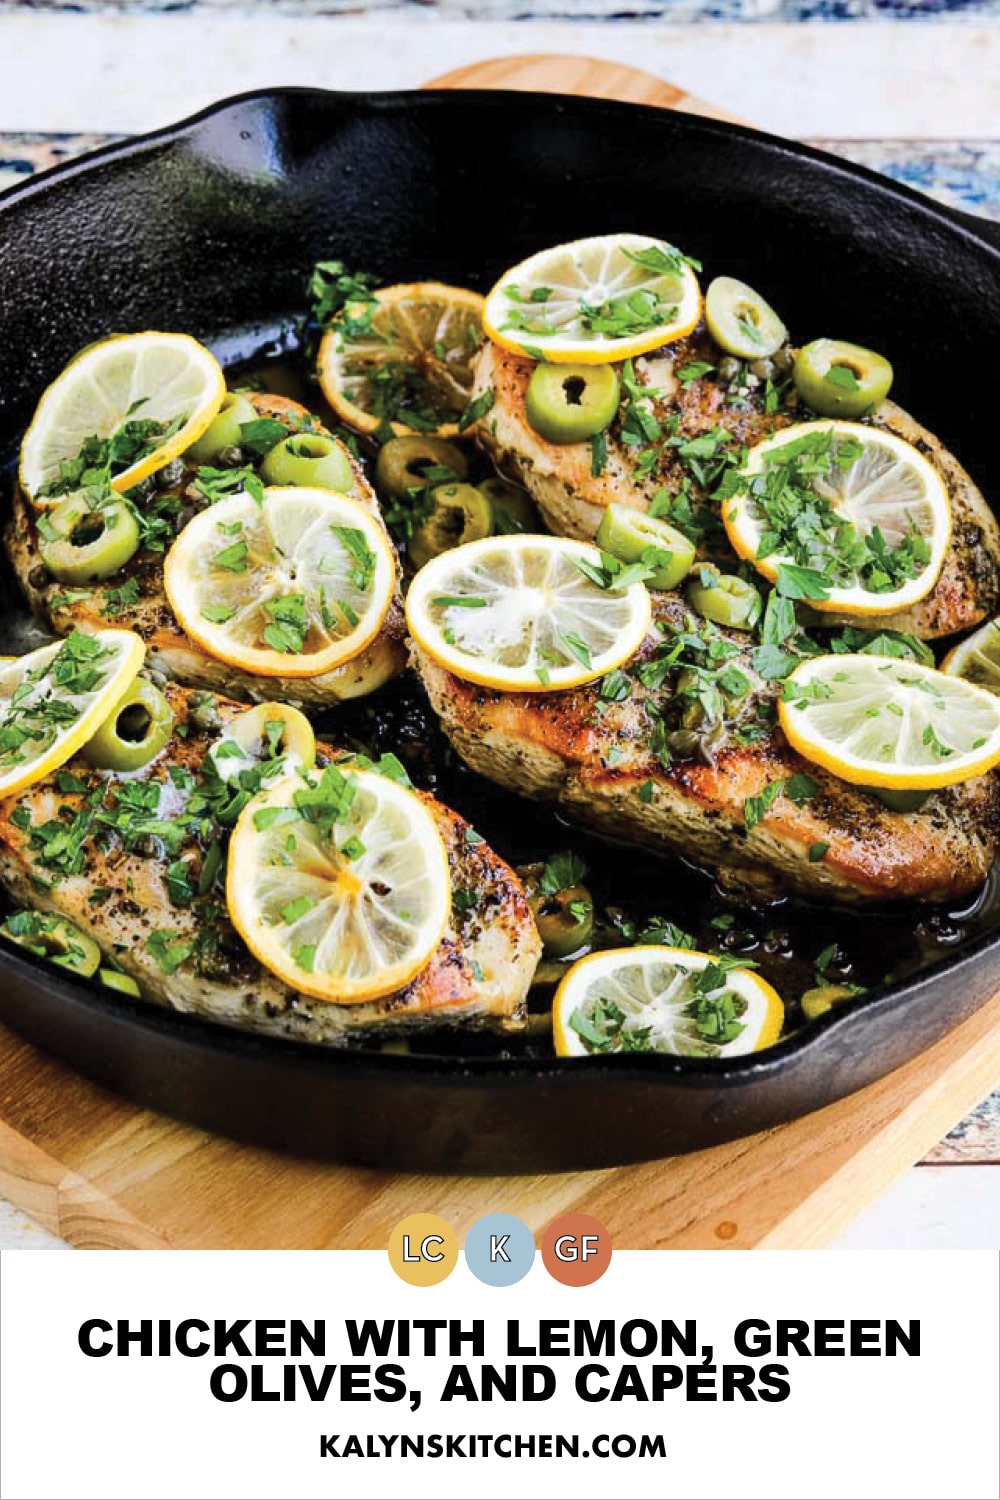 Pinterest image of Chicken with Lemon, Green Olives, and Capers